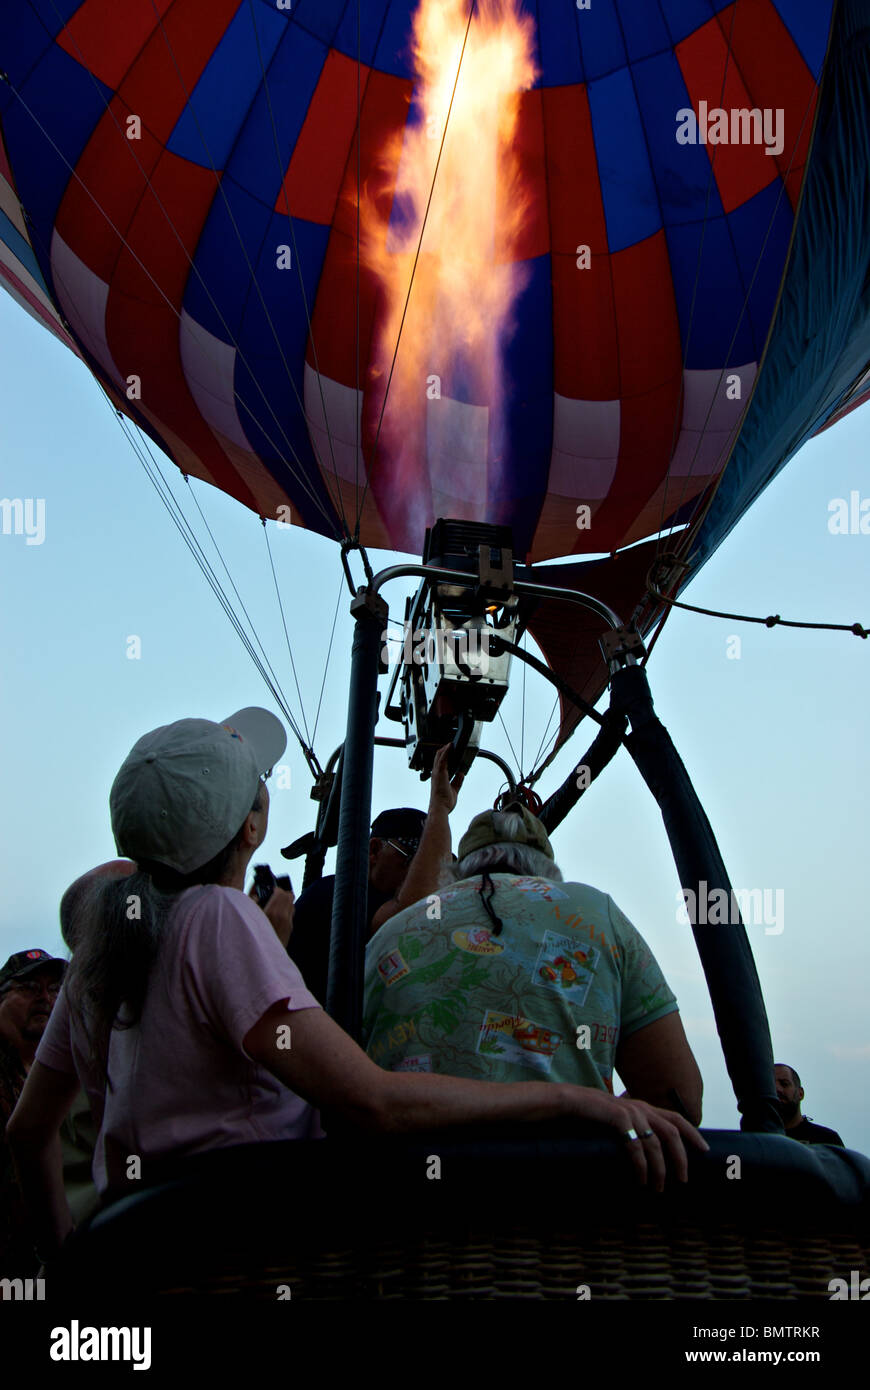 American Escapes Aerosports hot air balloon owner giving propane burners a fiery hot blast for lift Shreveport Bossier LA Stock Photo